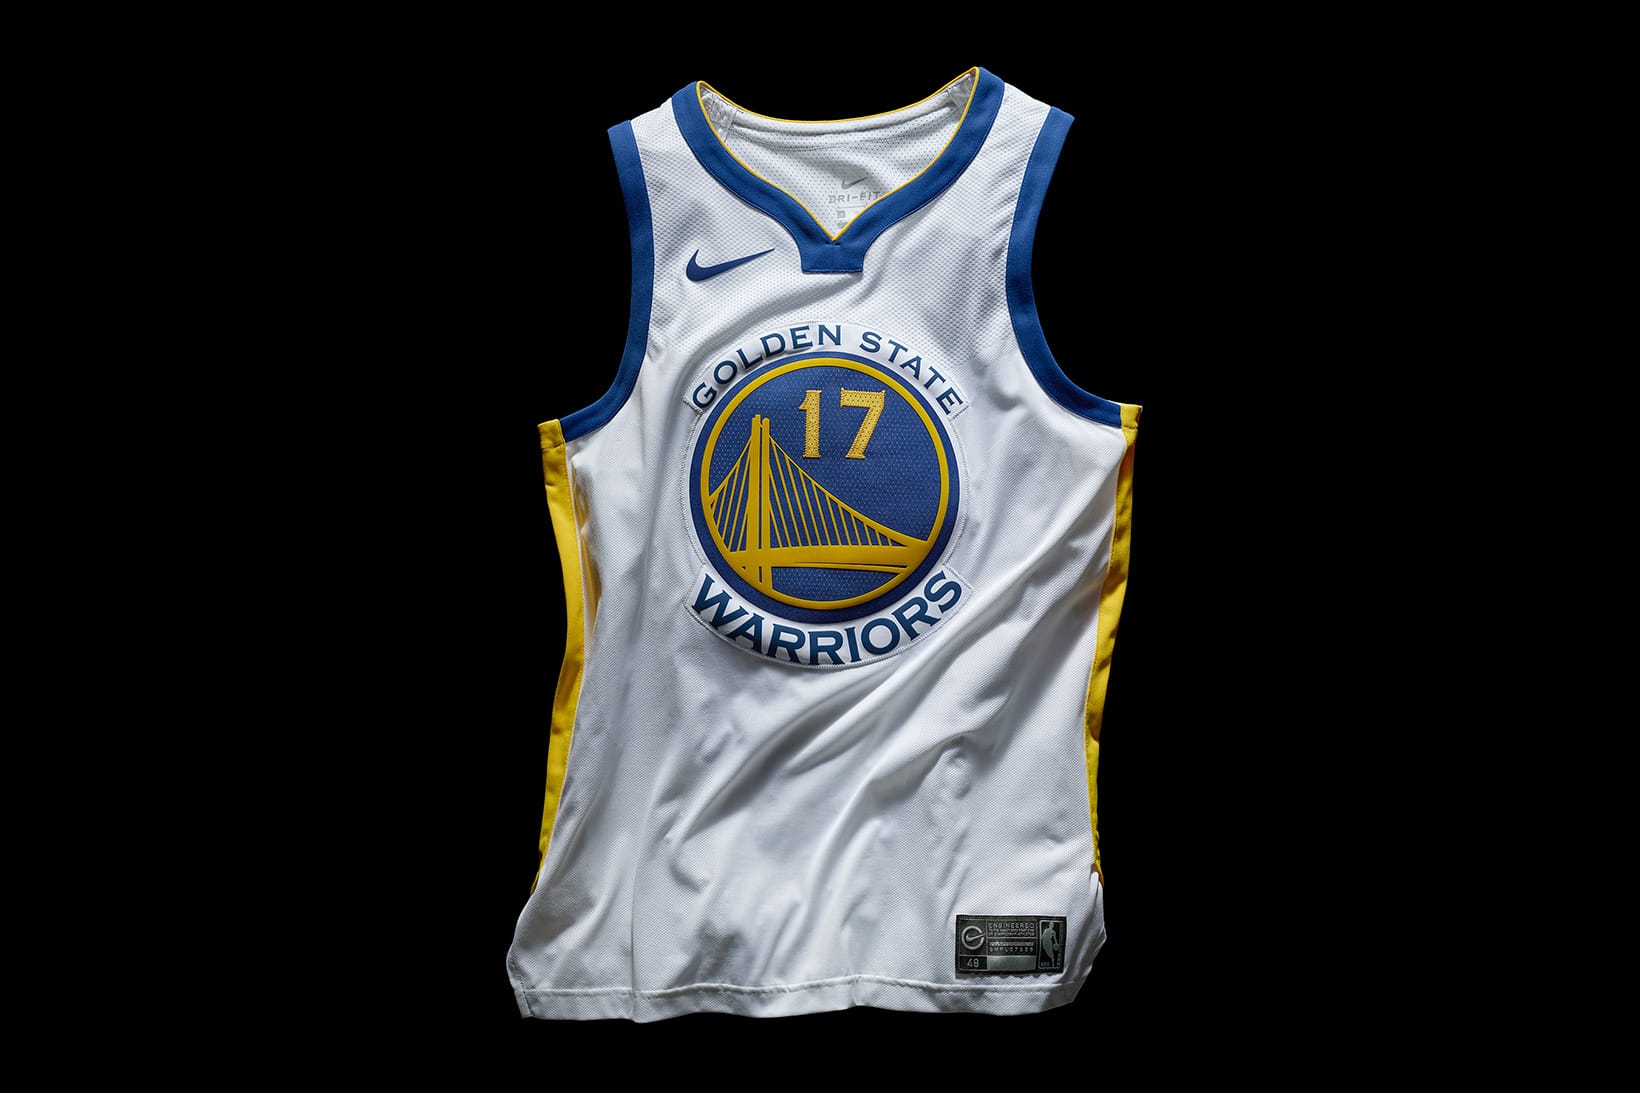 white and gold nba jersey